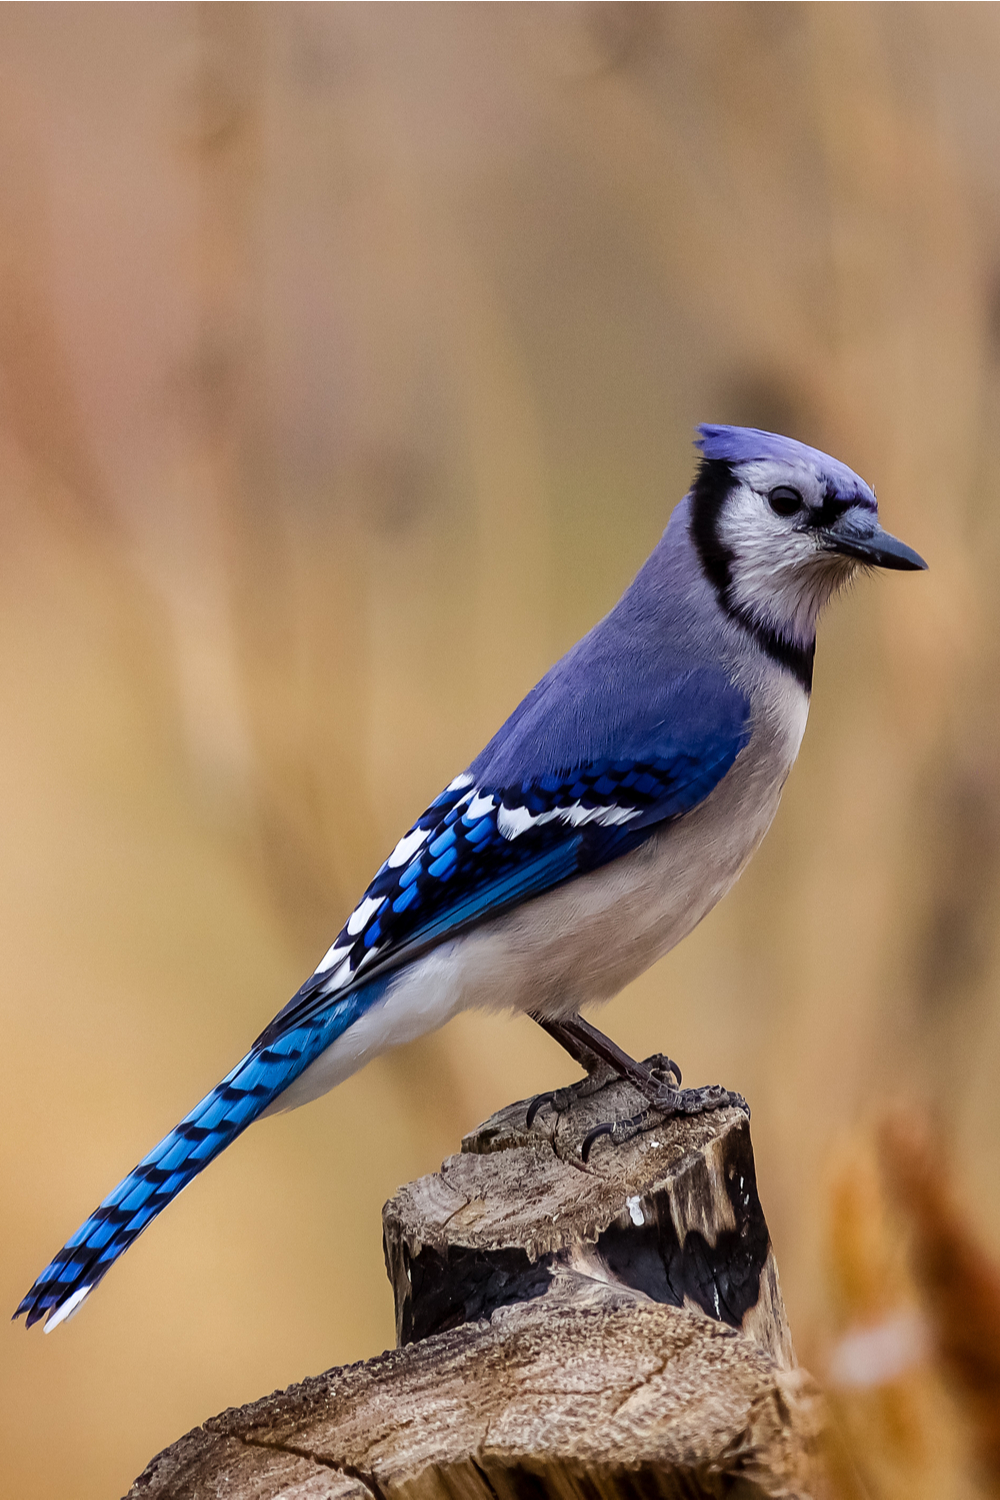 5 Spiritual Meanings Of Seeing A Blue Jay